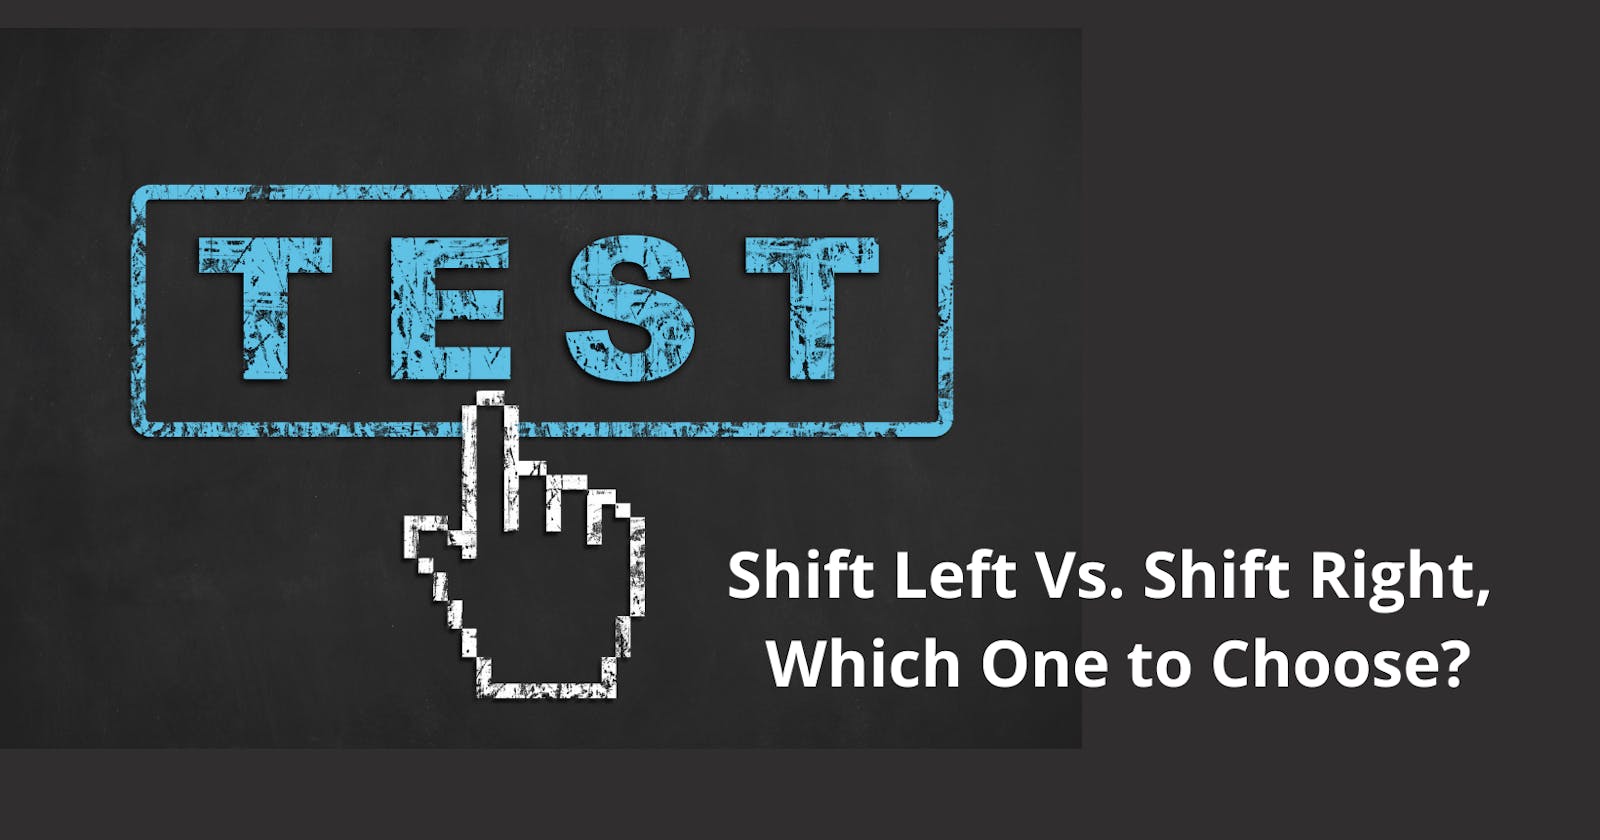 Shift Left Vs. Shift Right, Which One to Choose?